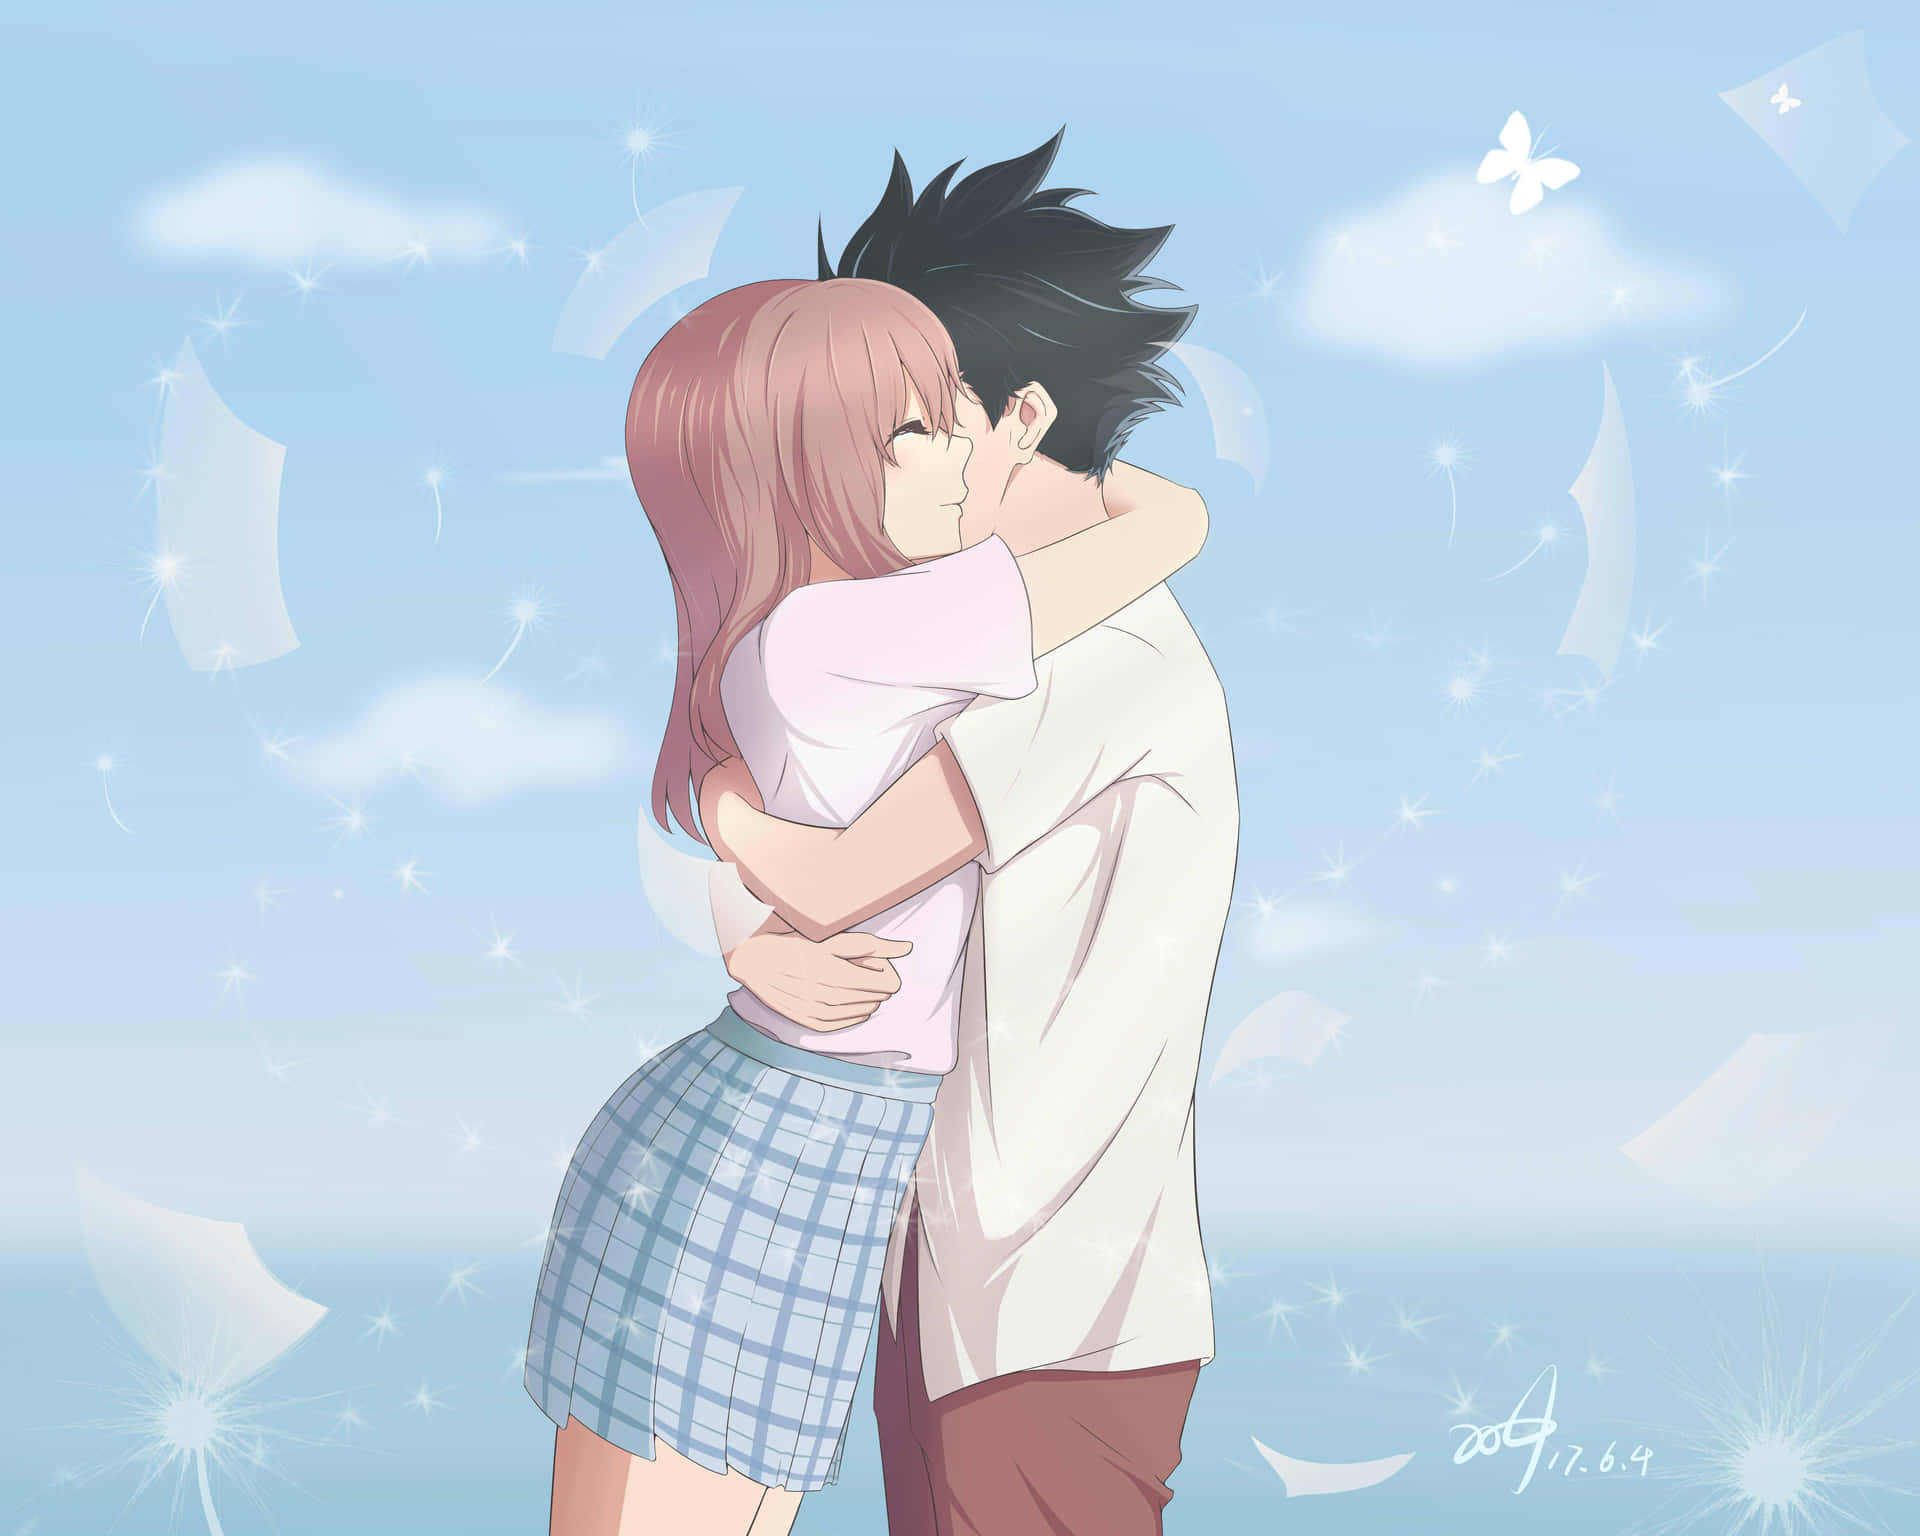 Follow the story of A Silent Voice as it's filled with hope, courage, and empowerment.